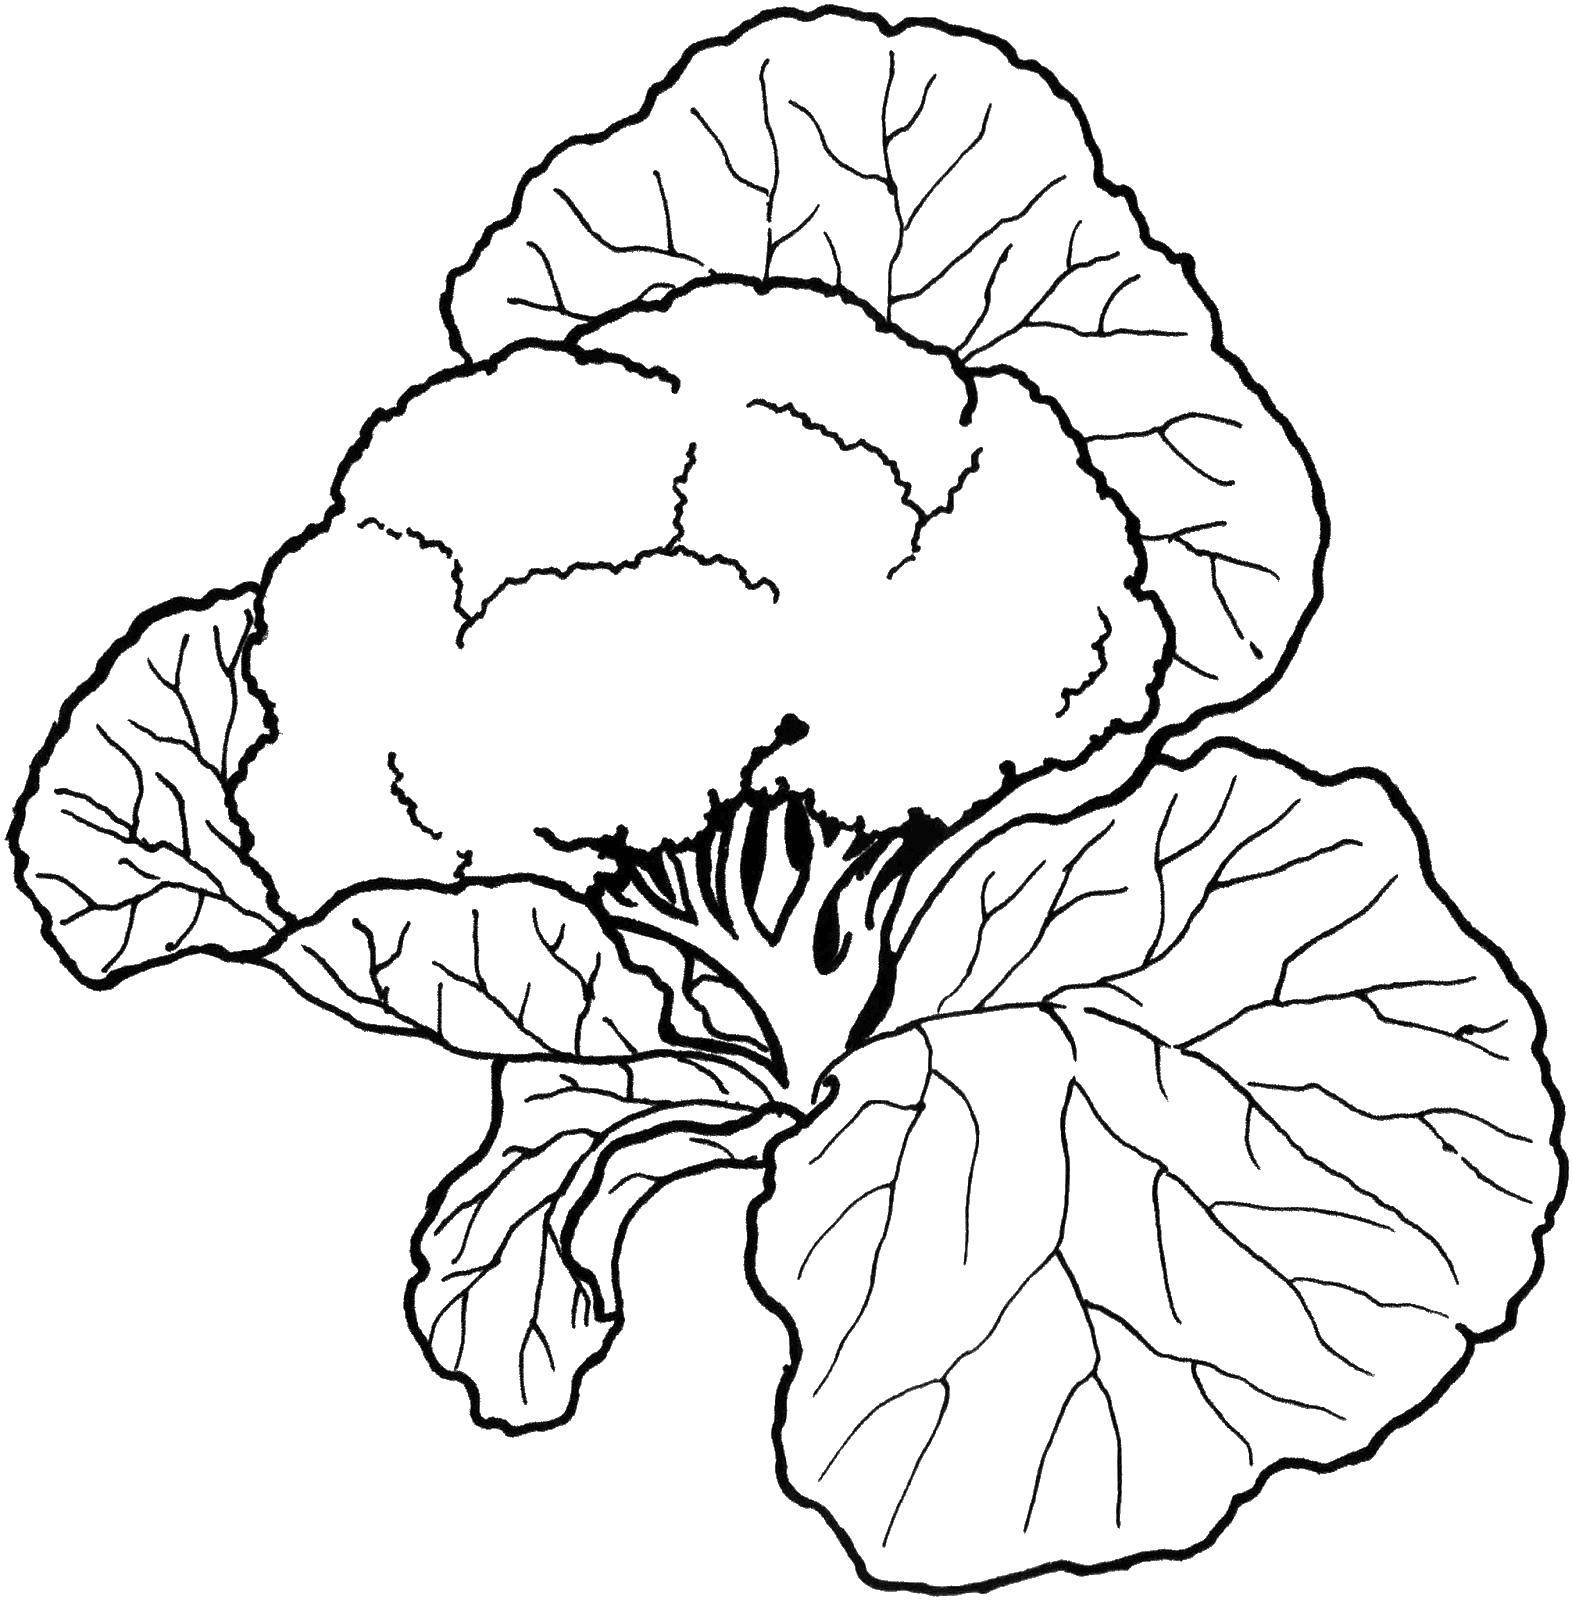 Coloring Broccoli leaves. Category Vegetables. Tags:  Vegetables.